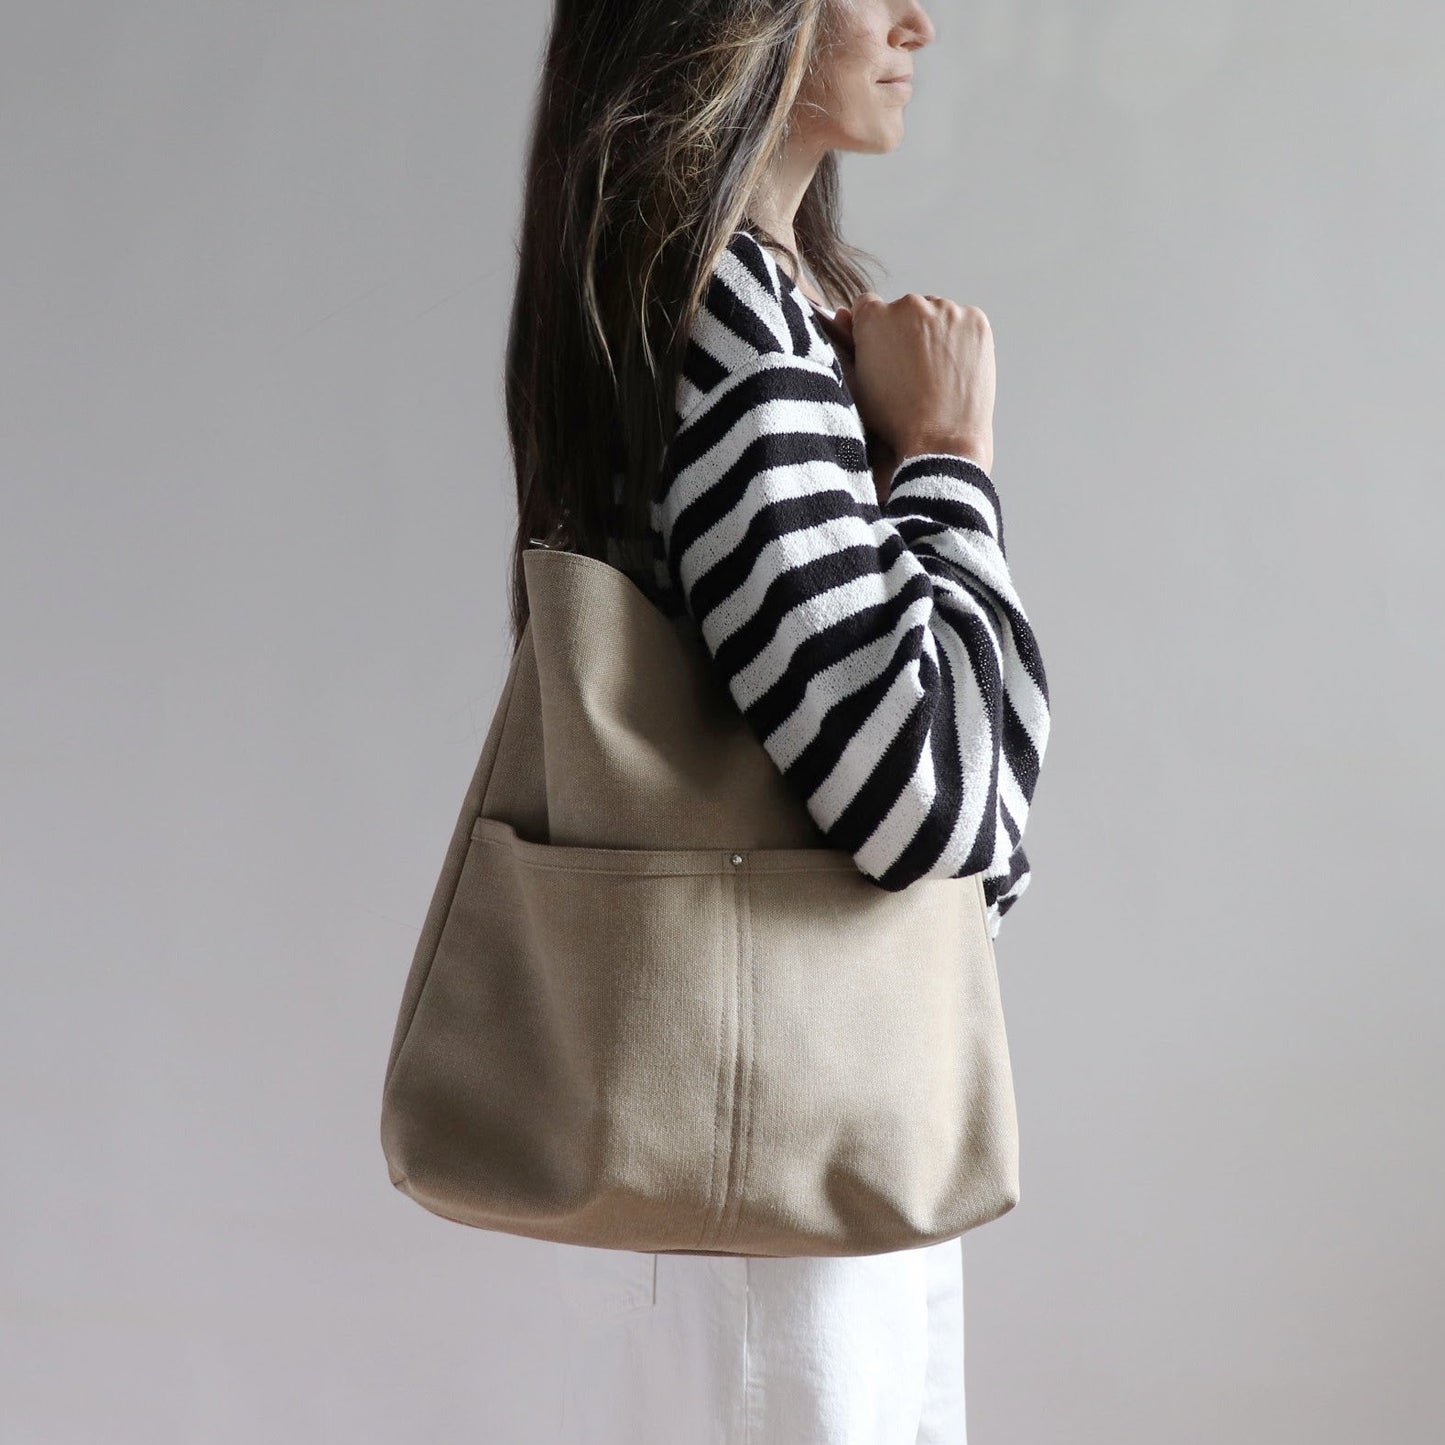 Model with large hobo tote bag in casual summer outfit